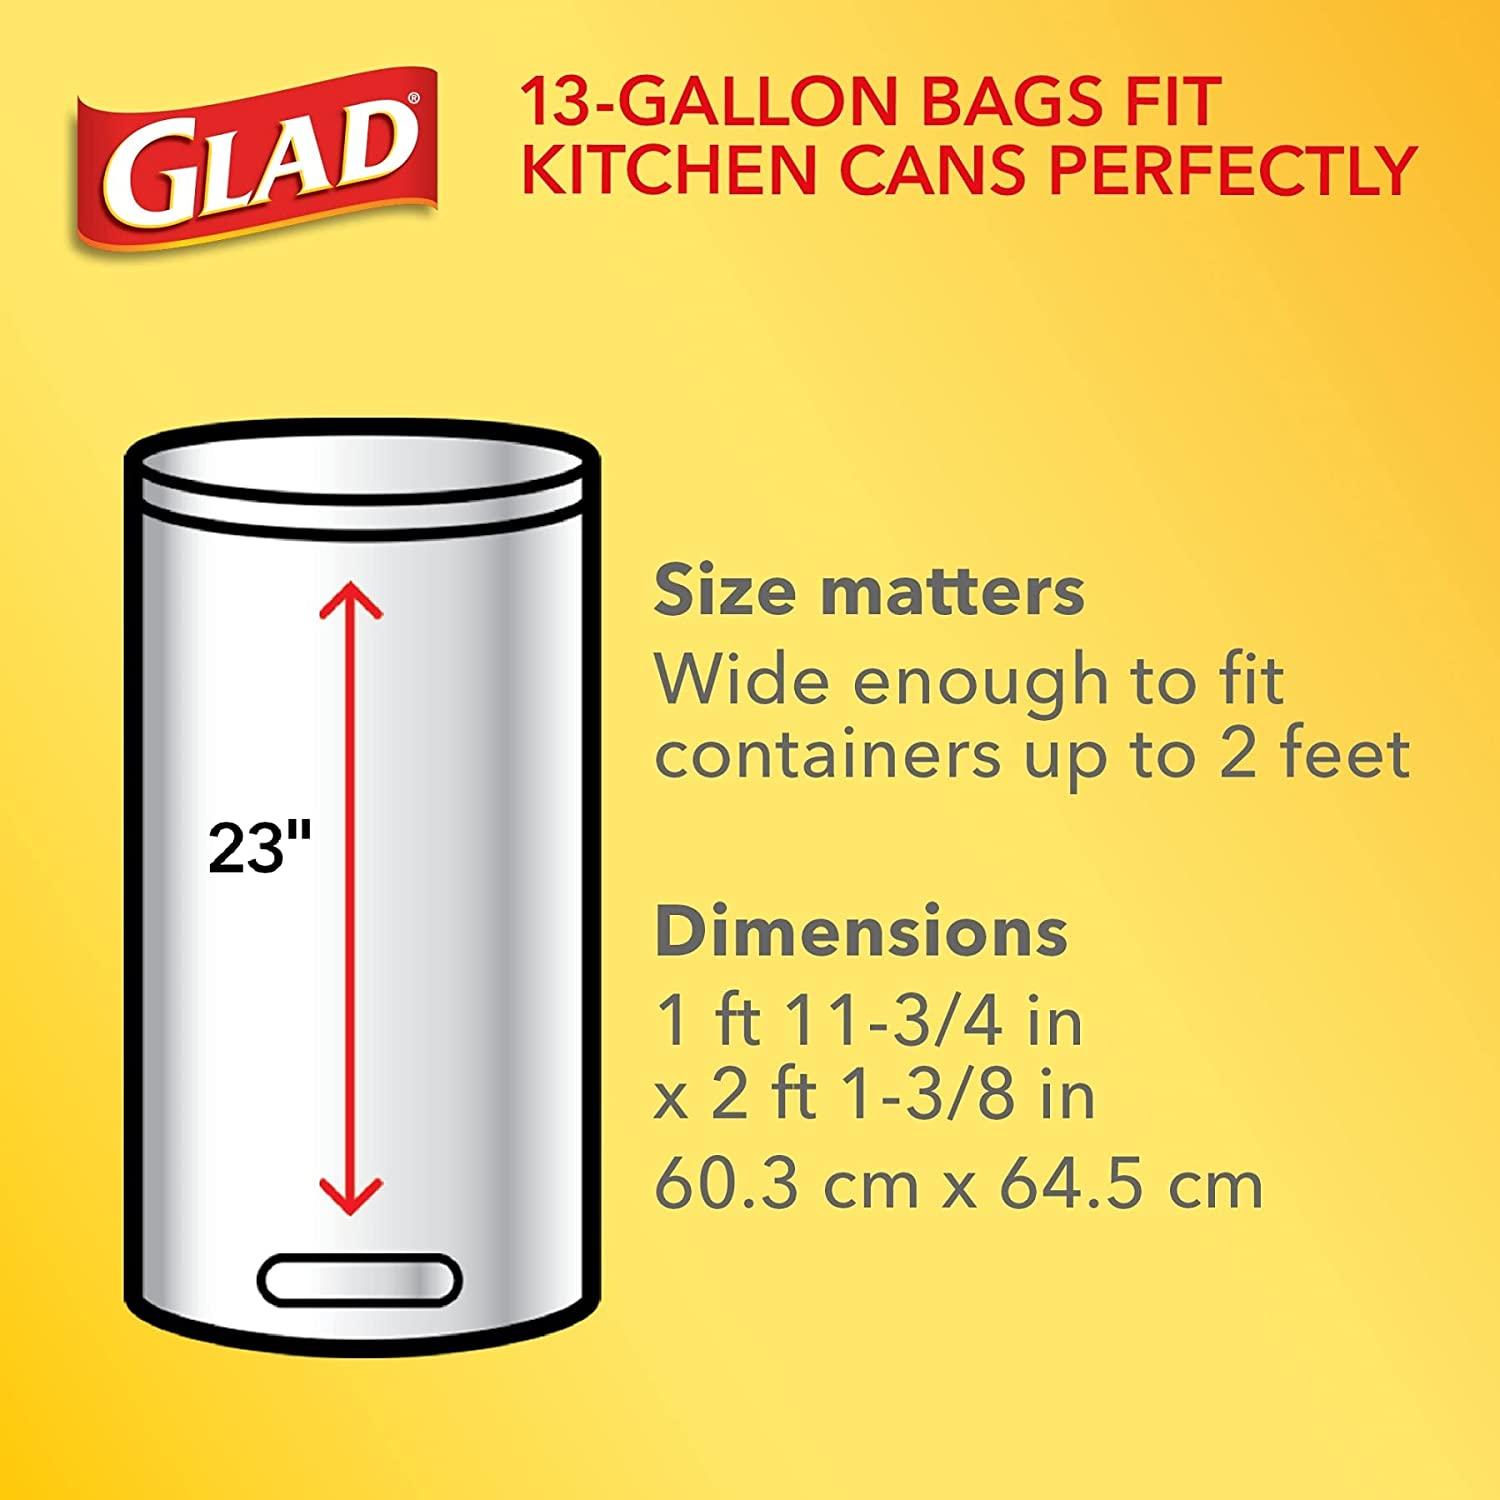 Glad Trash & Food Storage ForceFlex Protection Series Tall Trash Bags, 13  Gal, Gain Moonlight Breeze with Febreze, 110 Ct (Package May Vary)